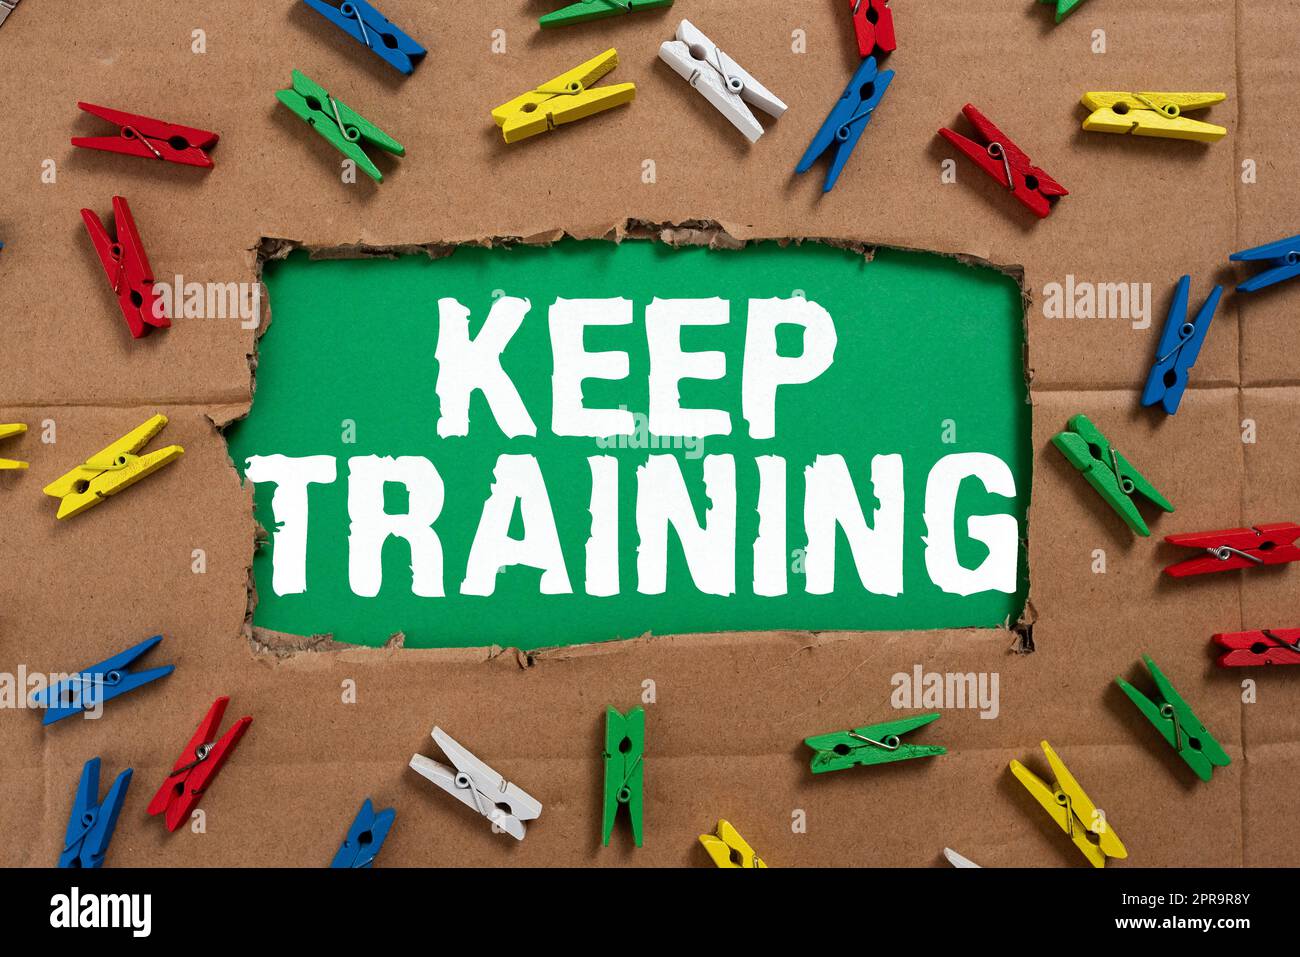 Text caption presenting Keep Training. Business approach Grounding Drilling Always Wonder Be Curious Learn Important Ideas Written Under Ripped Cardboard With Colored Pegs Around. Stock Photo